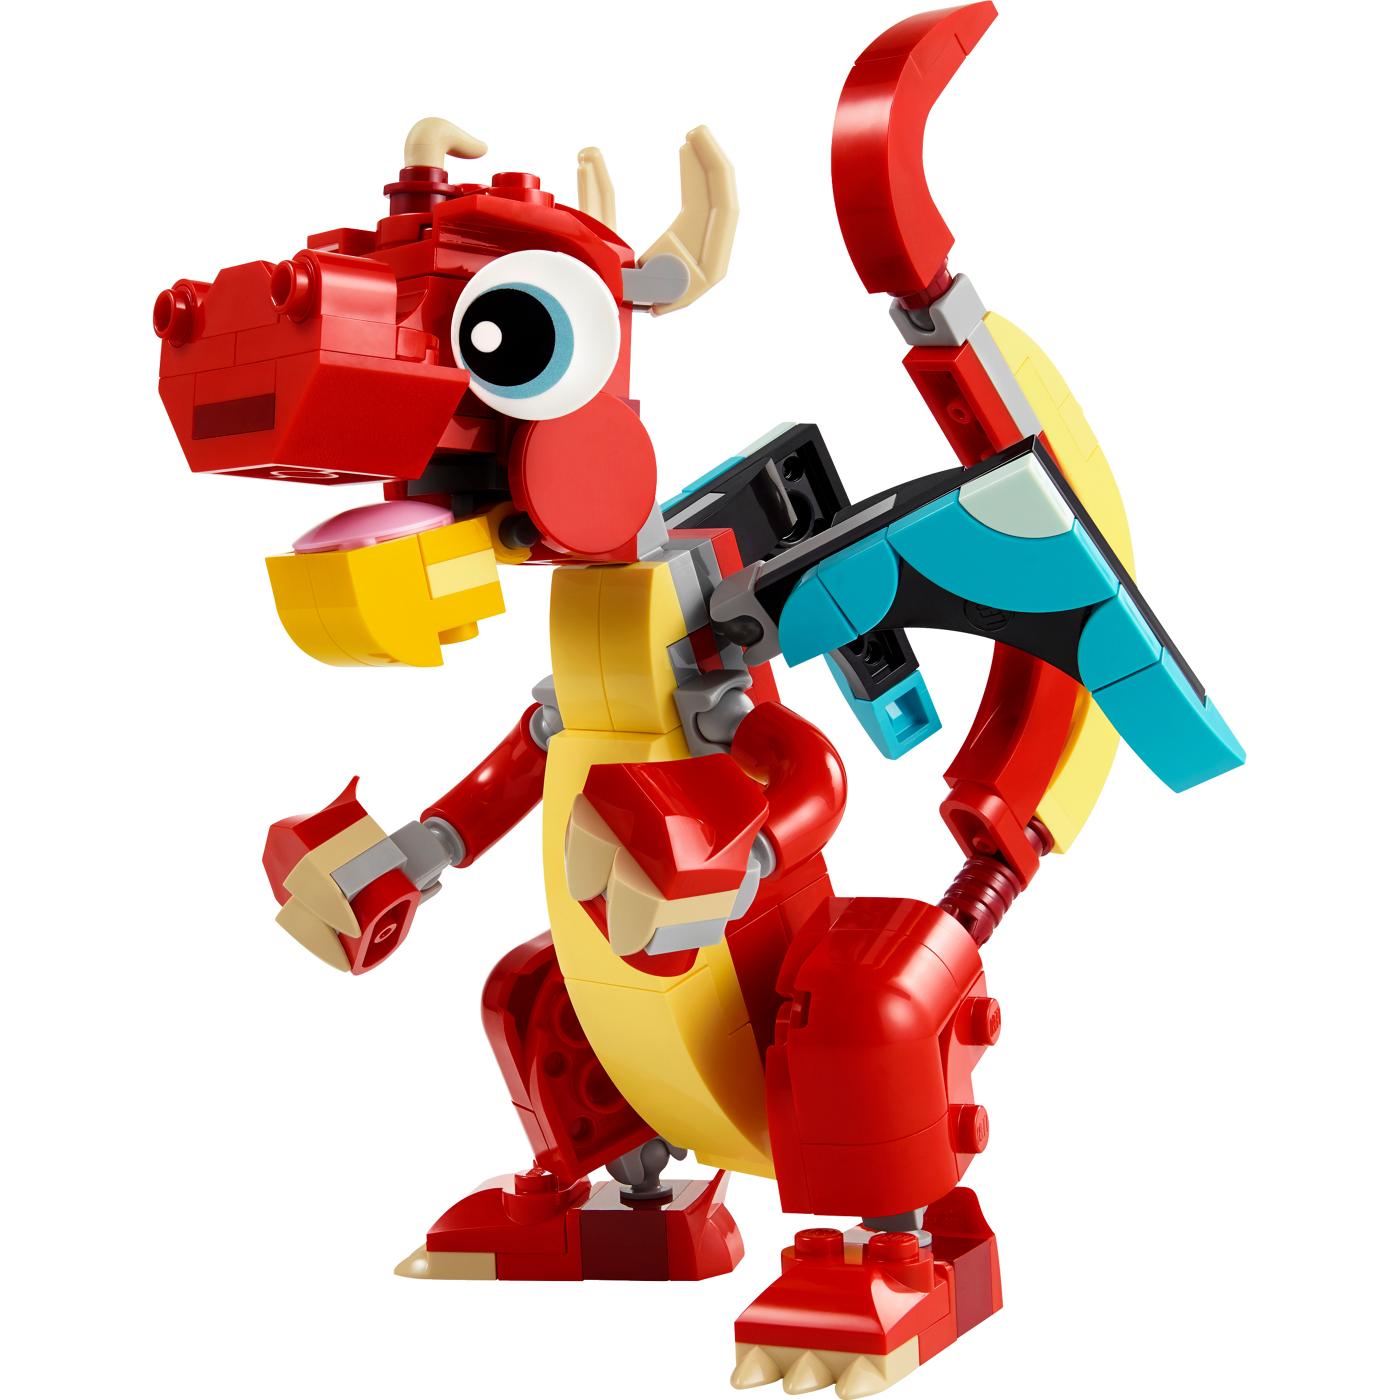 LEGO Creator 3-in-1 Red Dragon Set; image 2 of 2